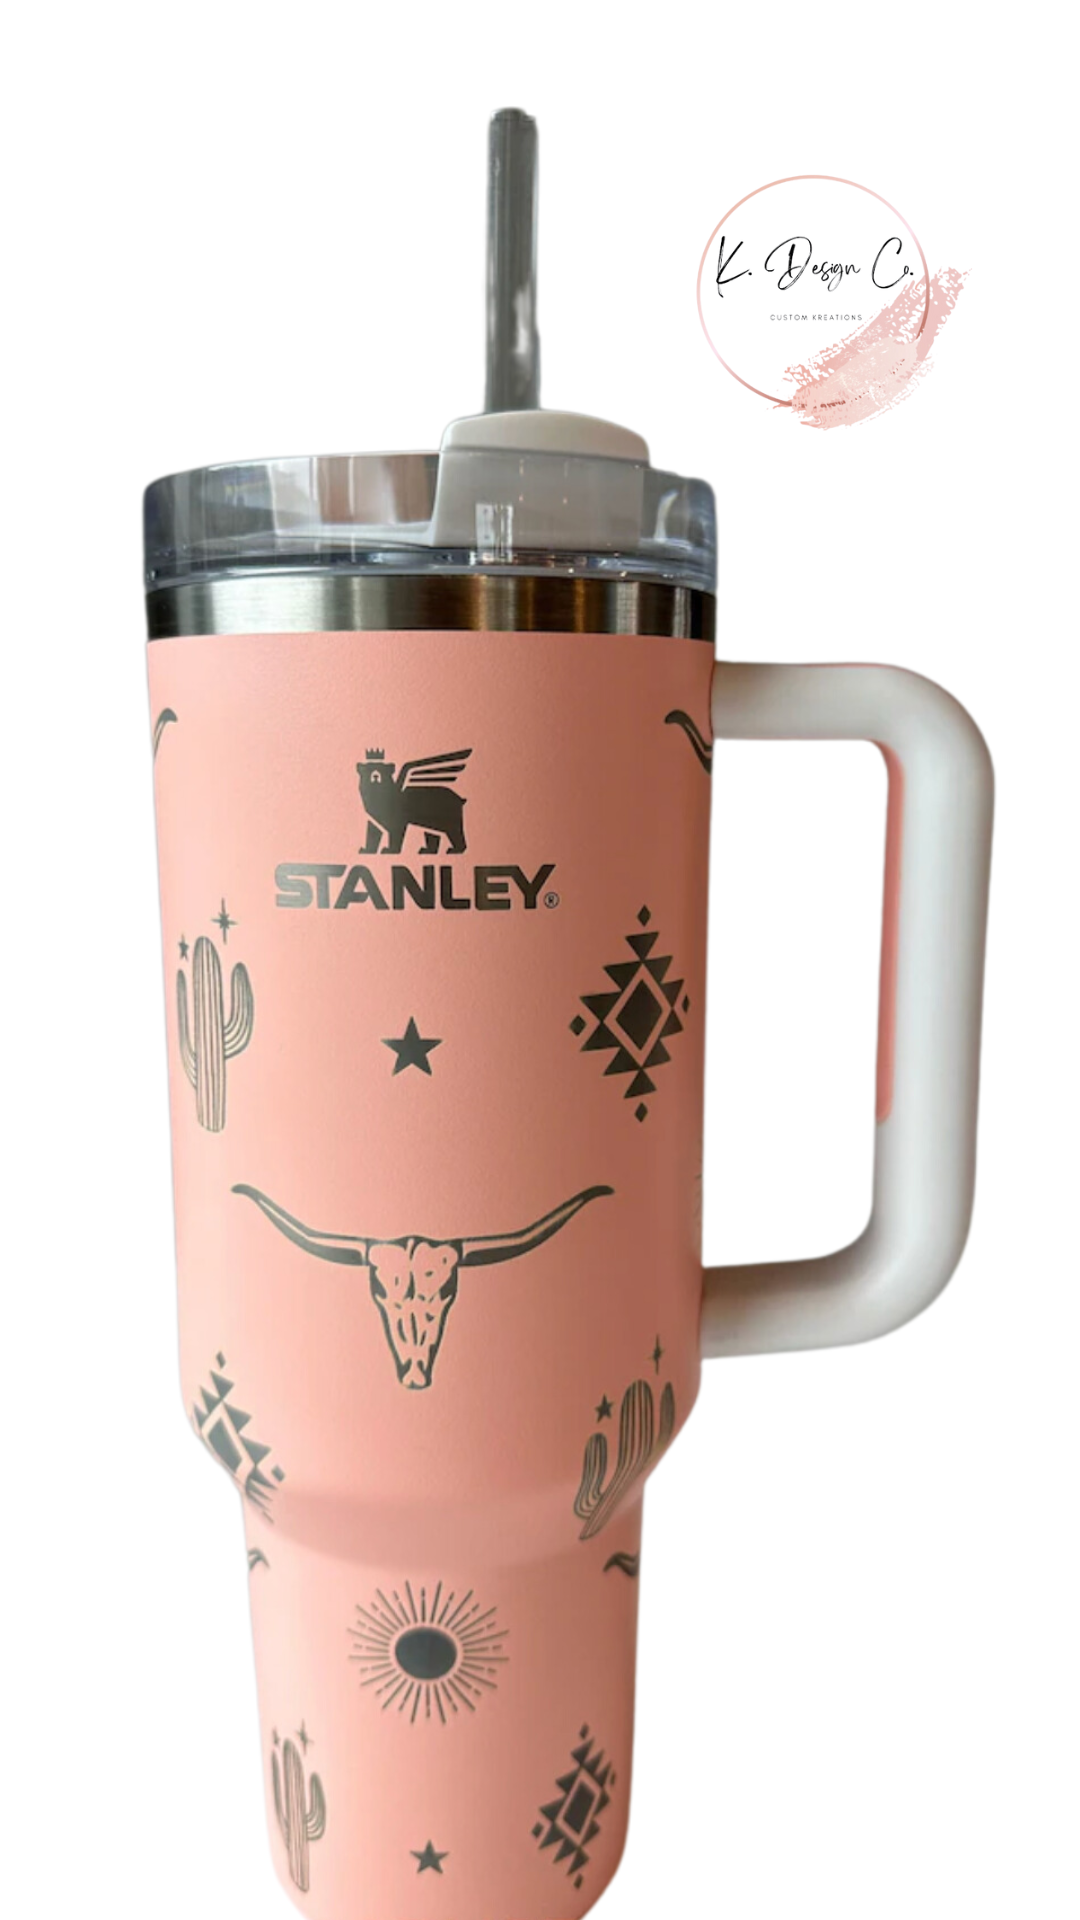 Original Stanley 30oz/40oz Quencher H2.0 Tumbler Cup With Handle